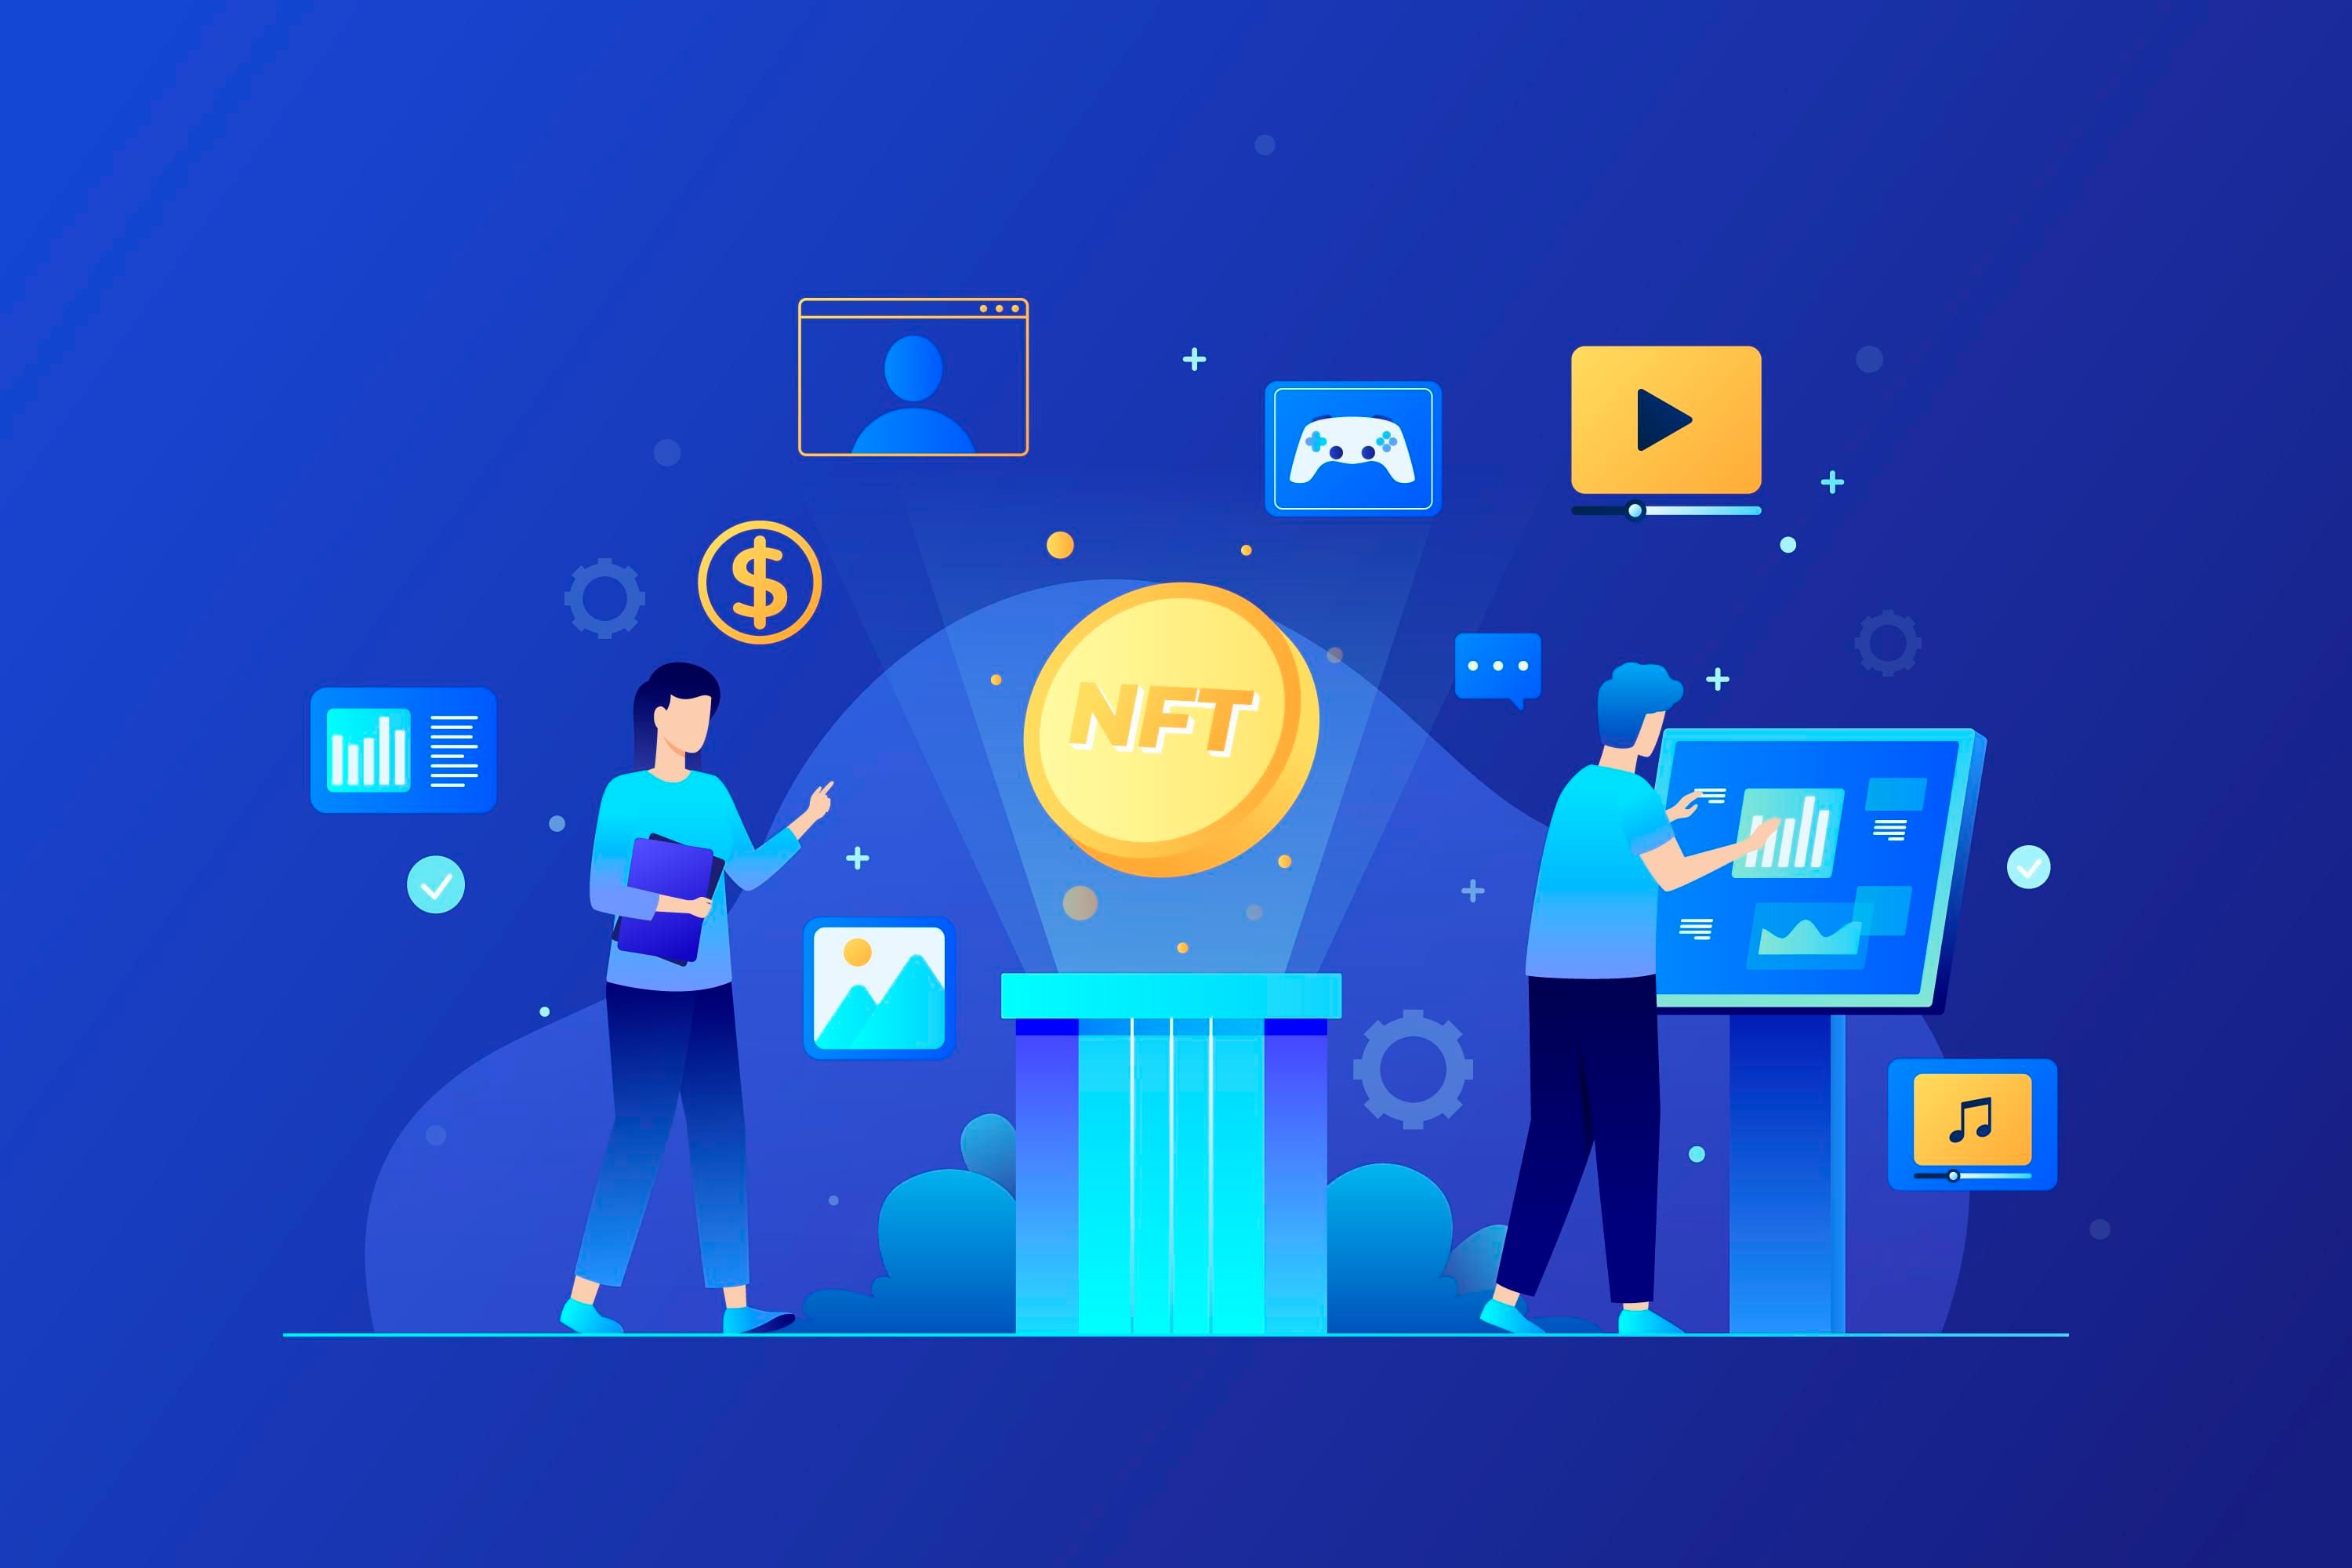 Illustrated NFT concept.